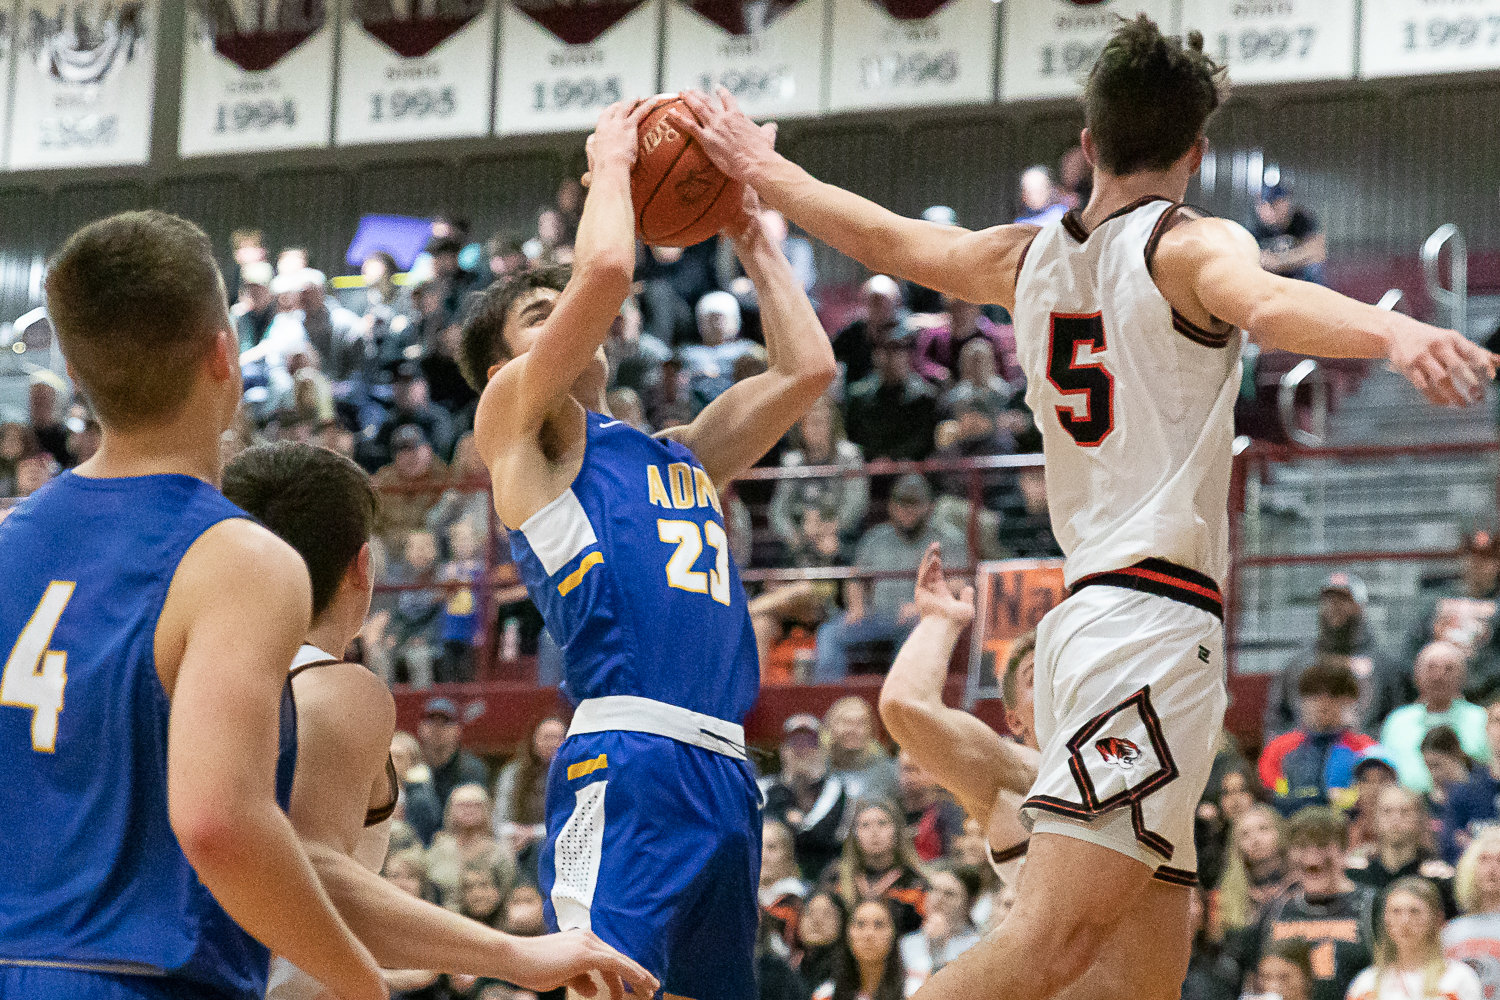 Adna forward Eli Smith looks to make a contested layup against Napavine in the 2B District 4 quarterfinals at W.F. West Feb. 8.